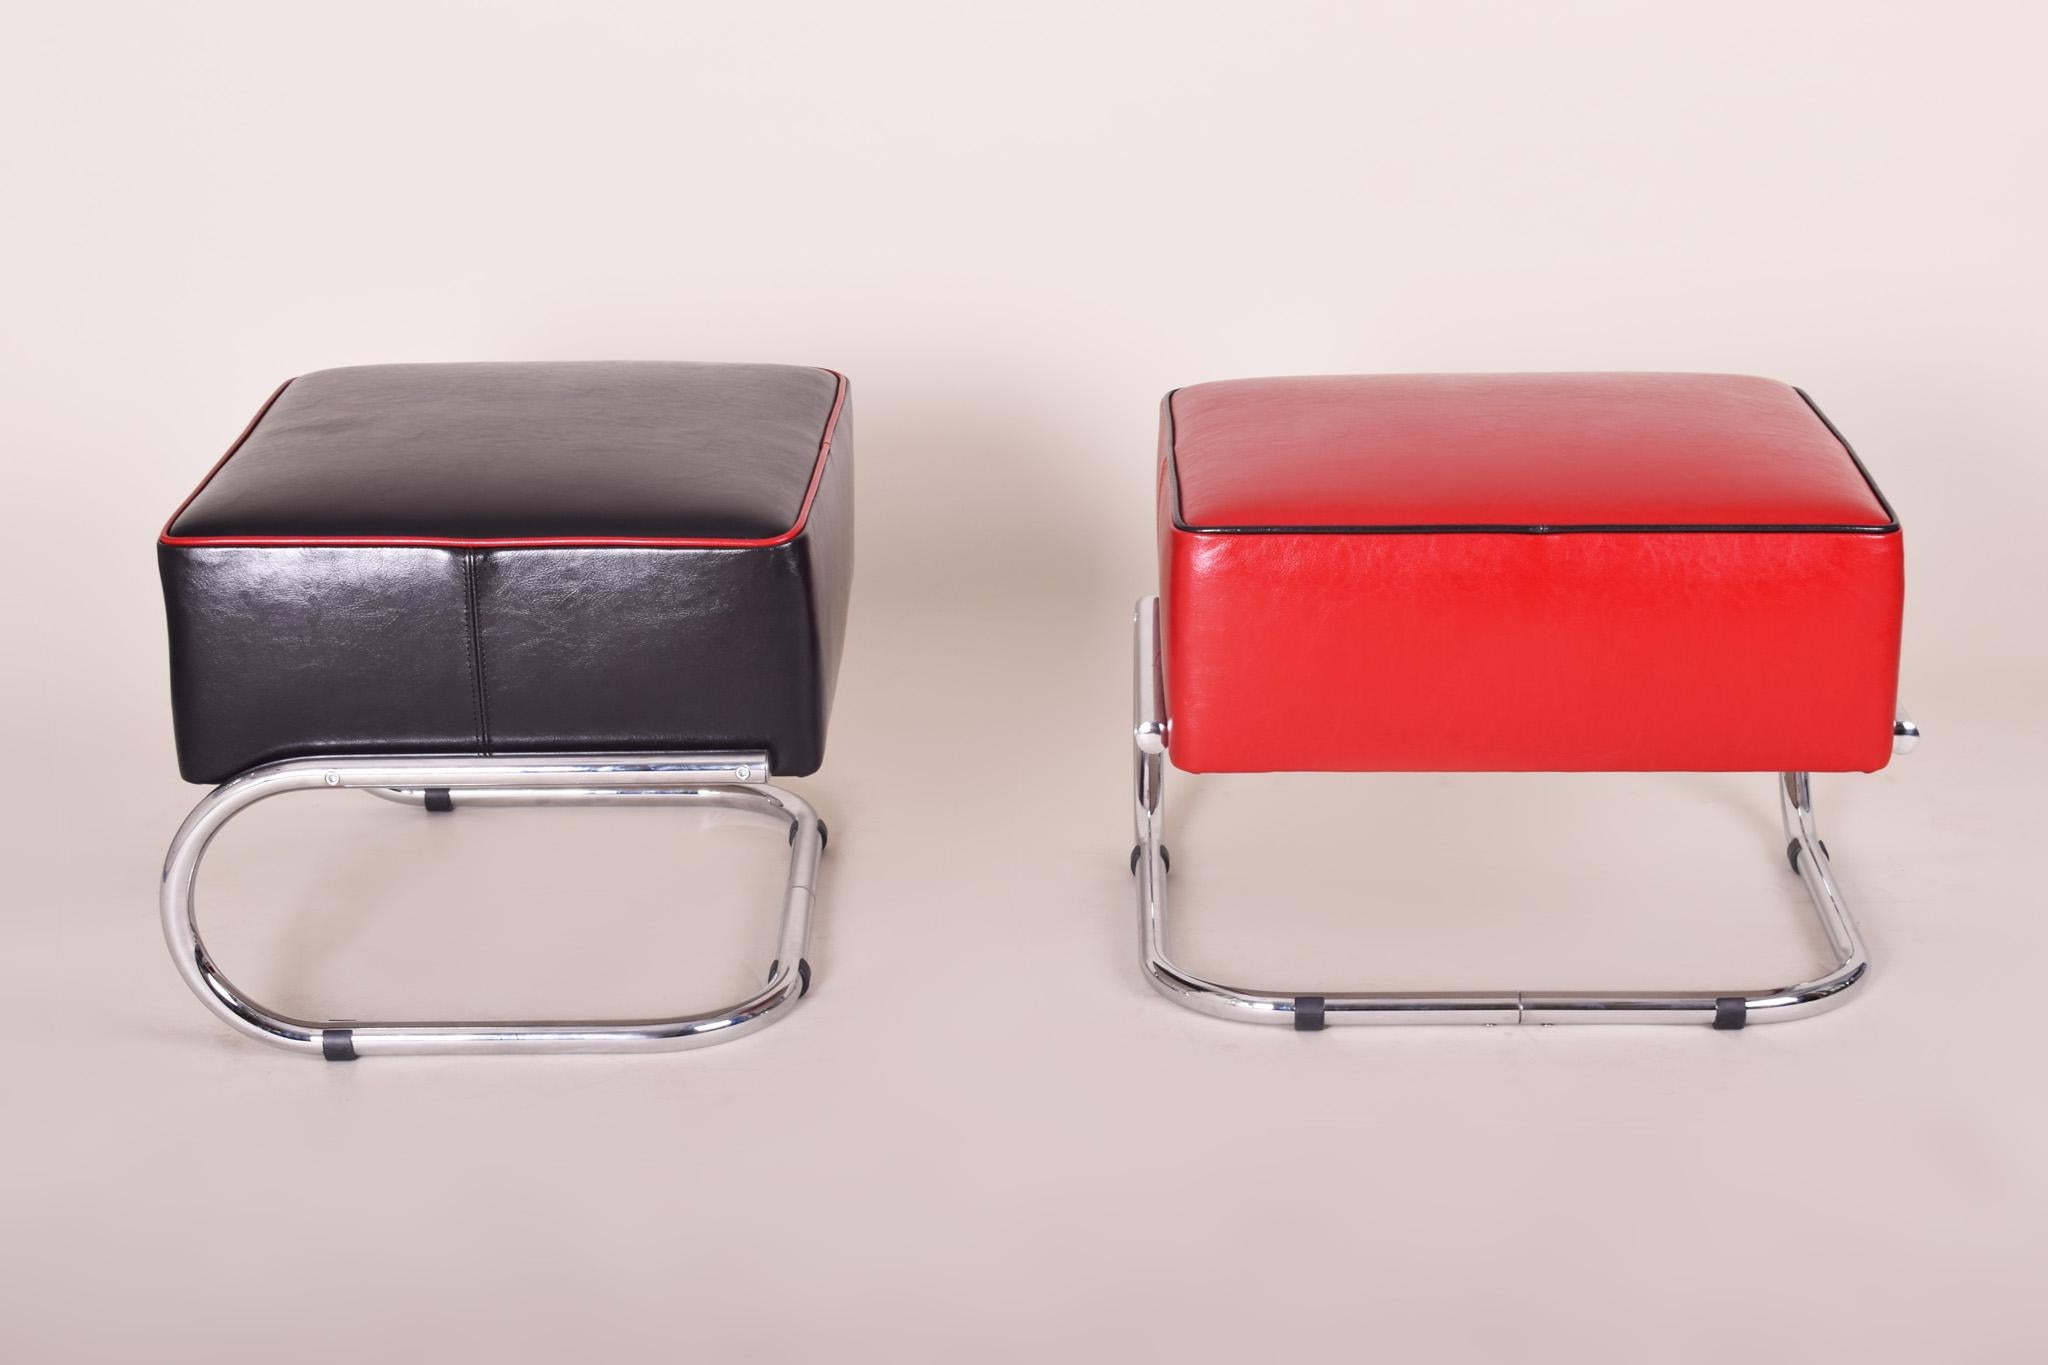 Modernist Art Deco chrome tabourettes.
Completely restored, New upholstery and leather.

We guarantee safe a the cheapest air transport from Europe to the whole world within 7 days.
The price is the same as for ship transport but delivery time is